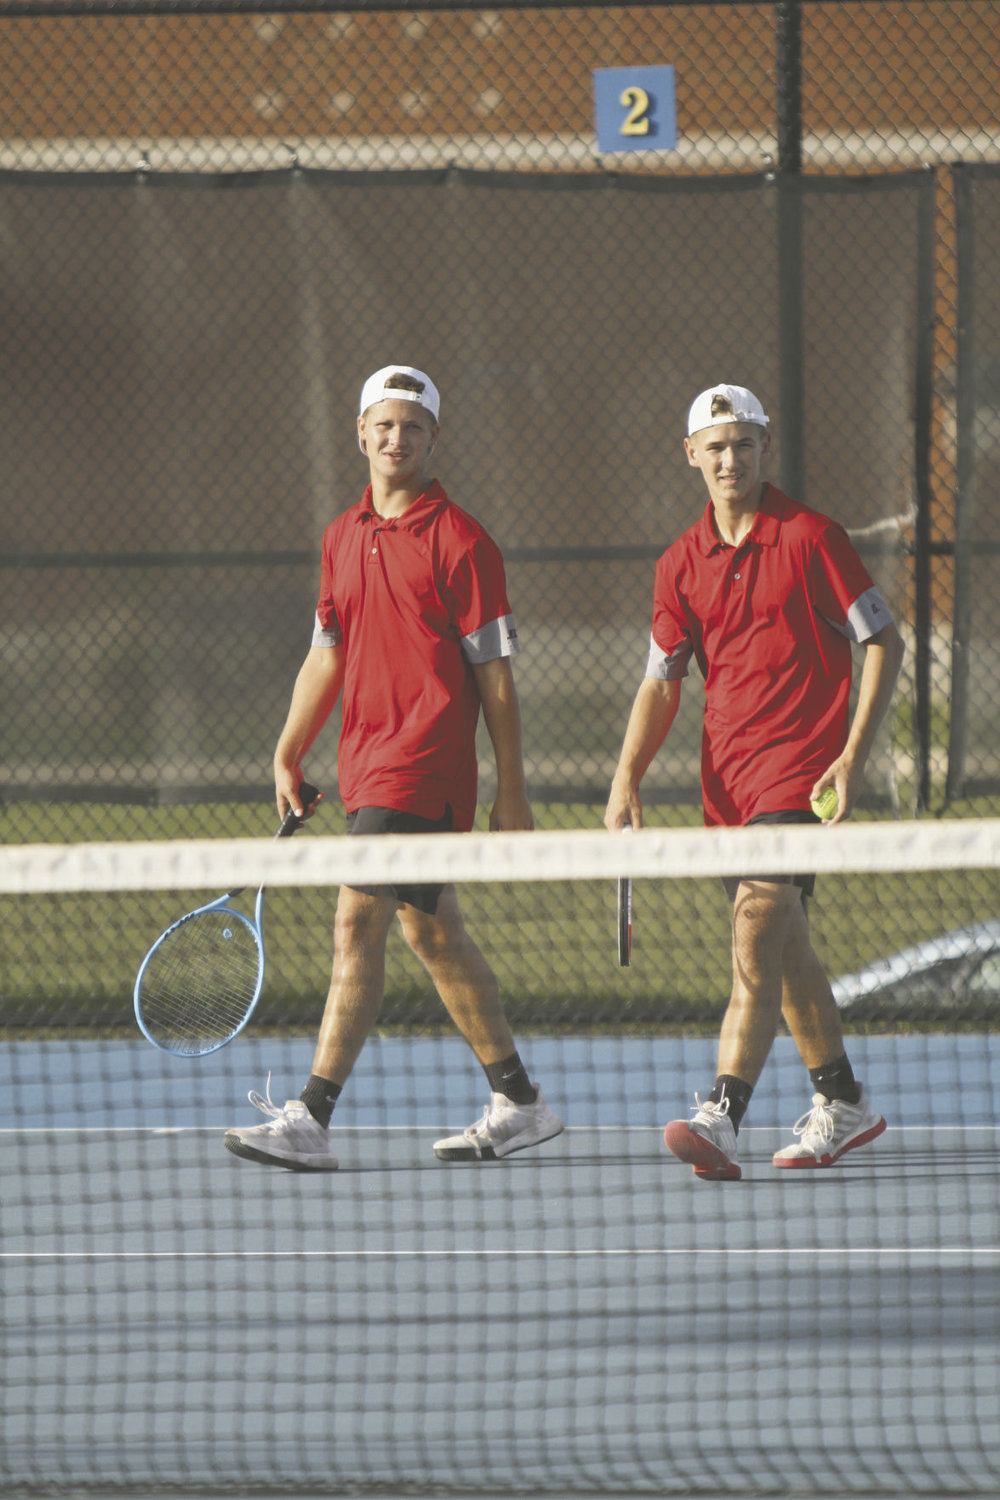 Southmont duo Reese Long and Micah Korhorn are pleased with how their match is going in the win over Crawfordsville.